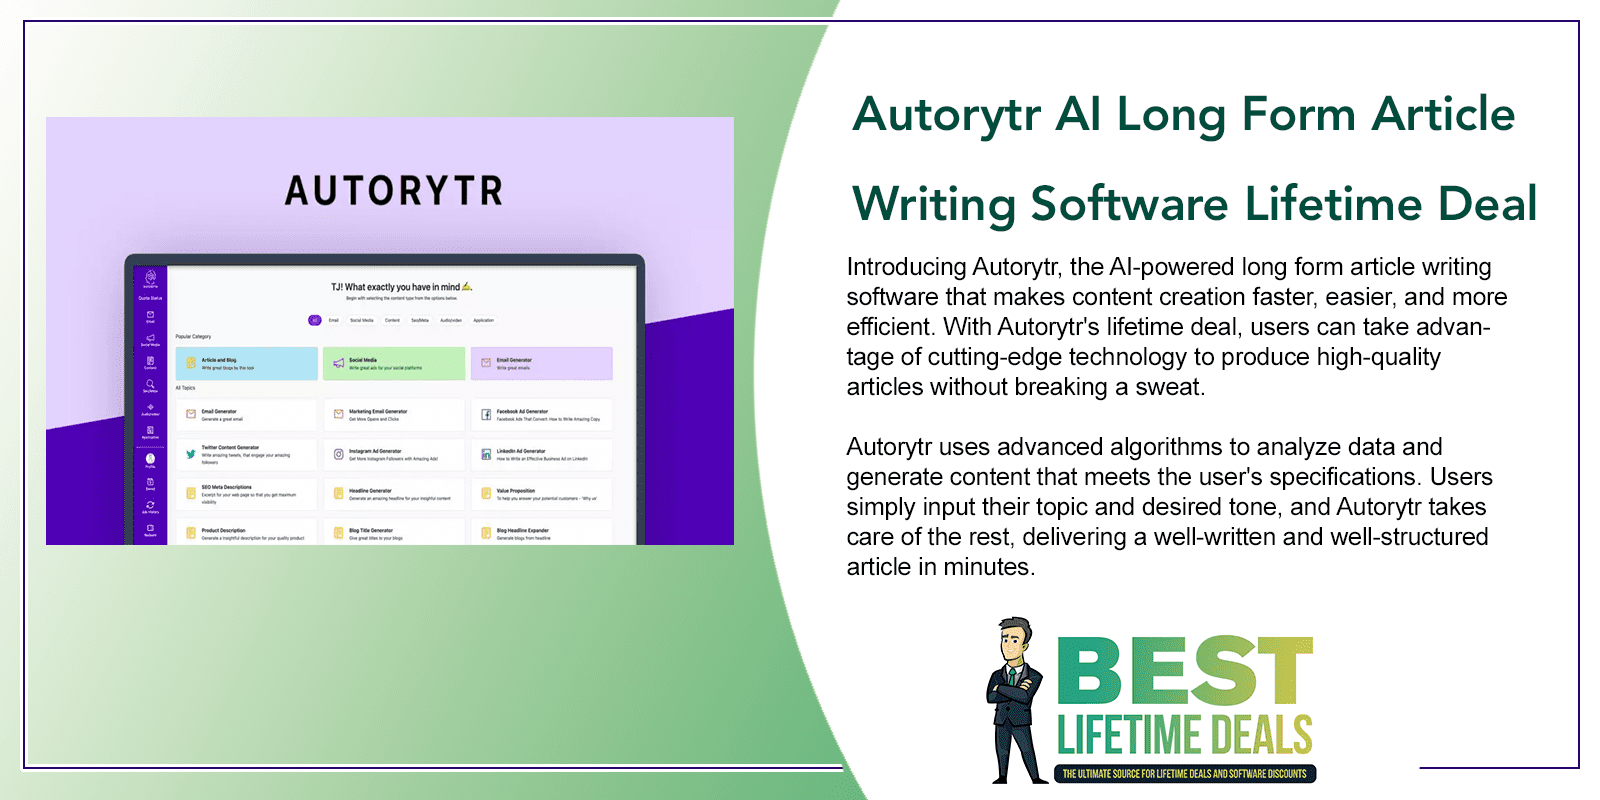 Autorytr AI Long Form Article Writing Software Lifetime Deal Featured Image